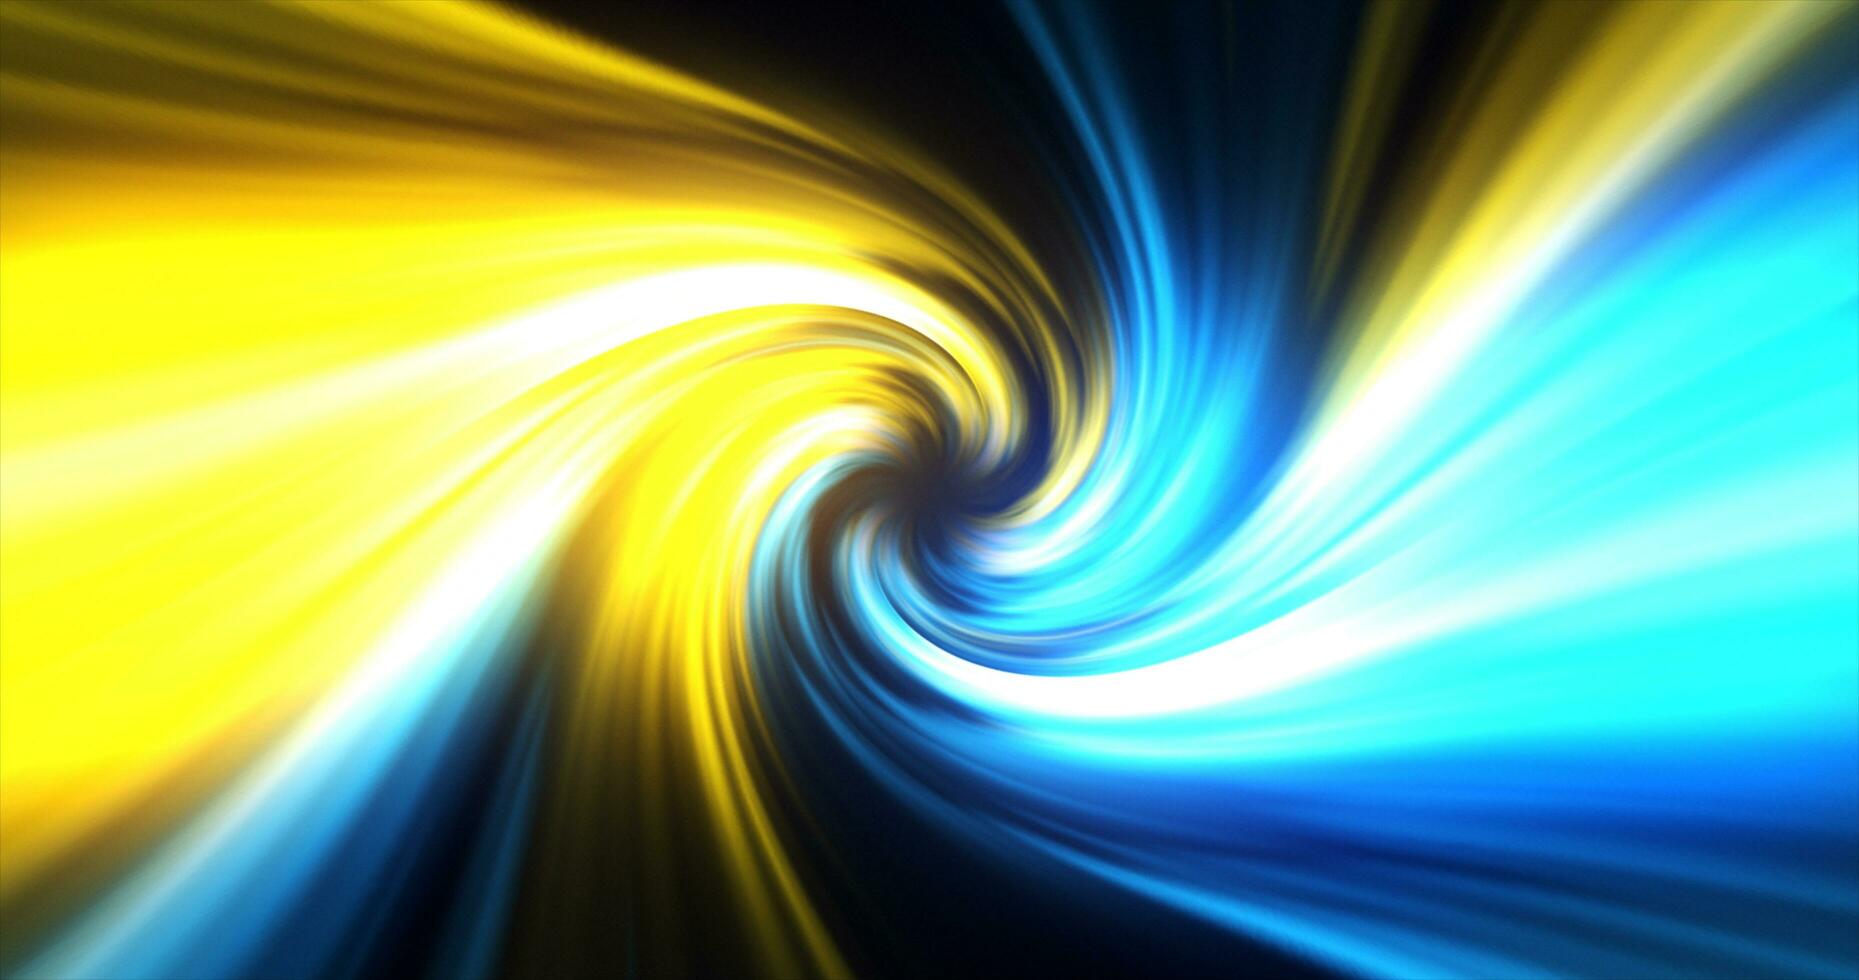 Abstract yellow blue swirl twisted abstract tunnel from lines background photo